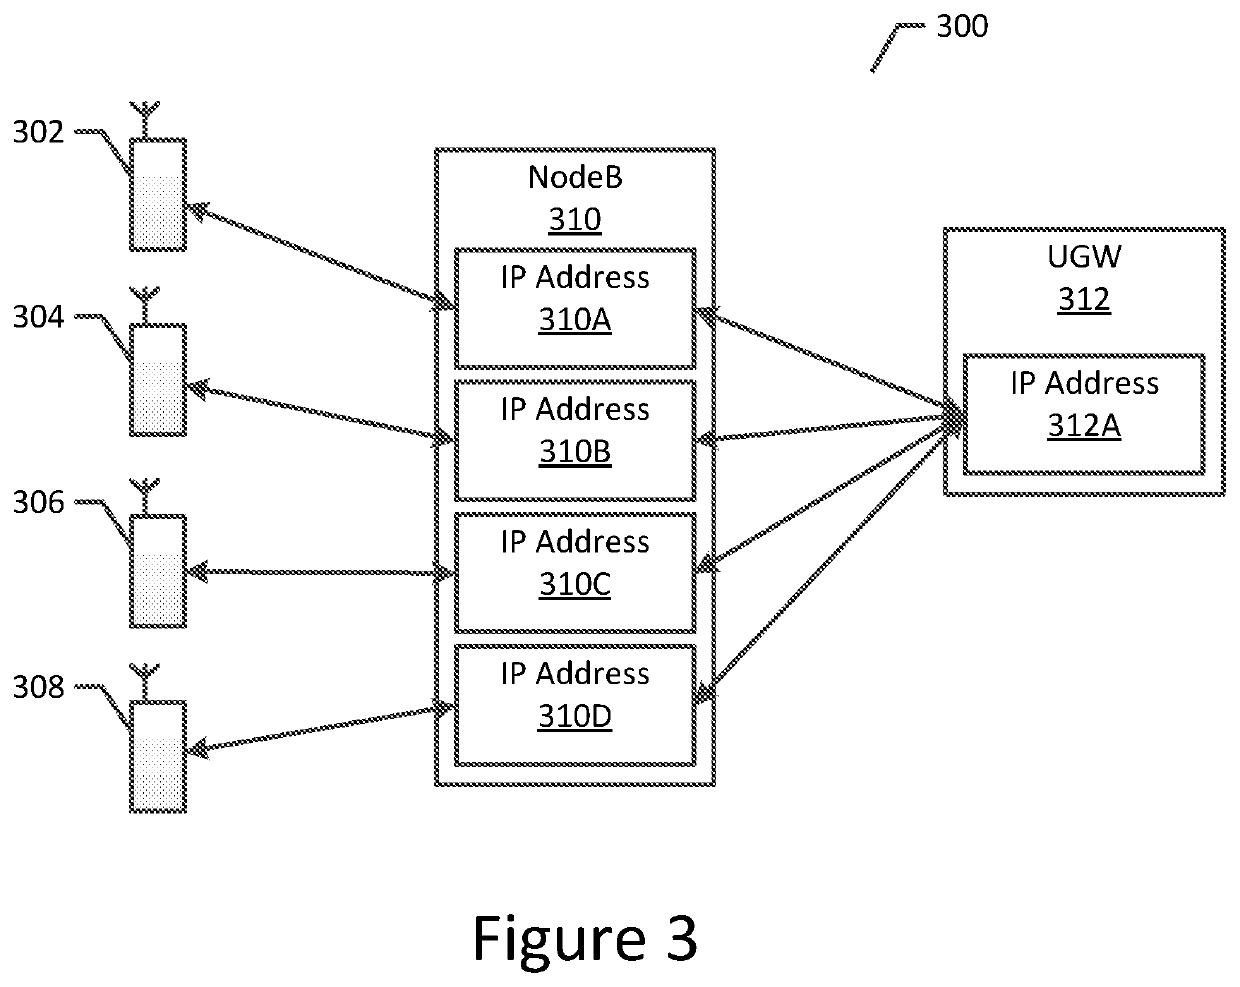 Method and apparatus for load balancing IP address selection in a network environment